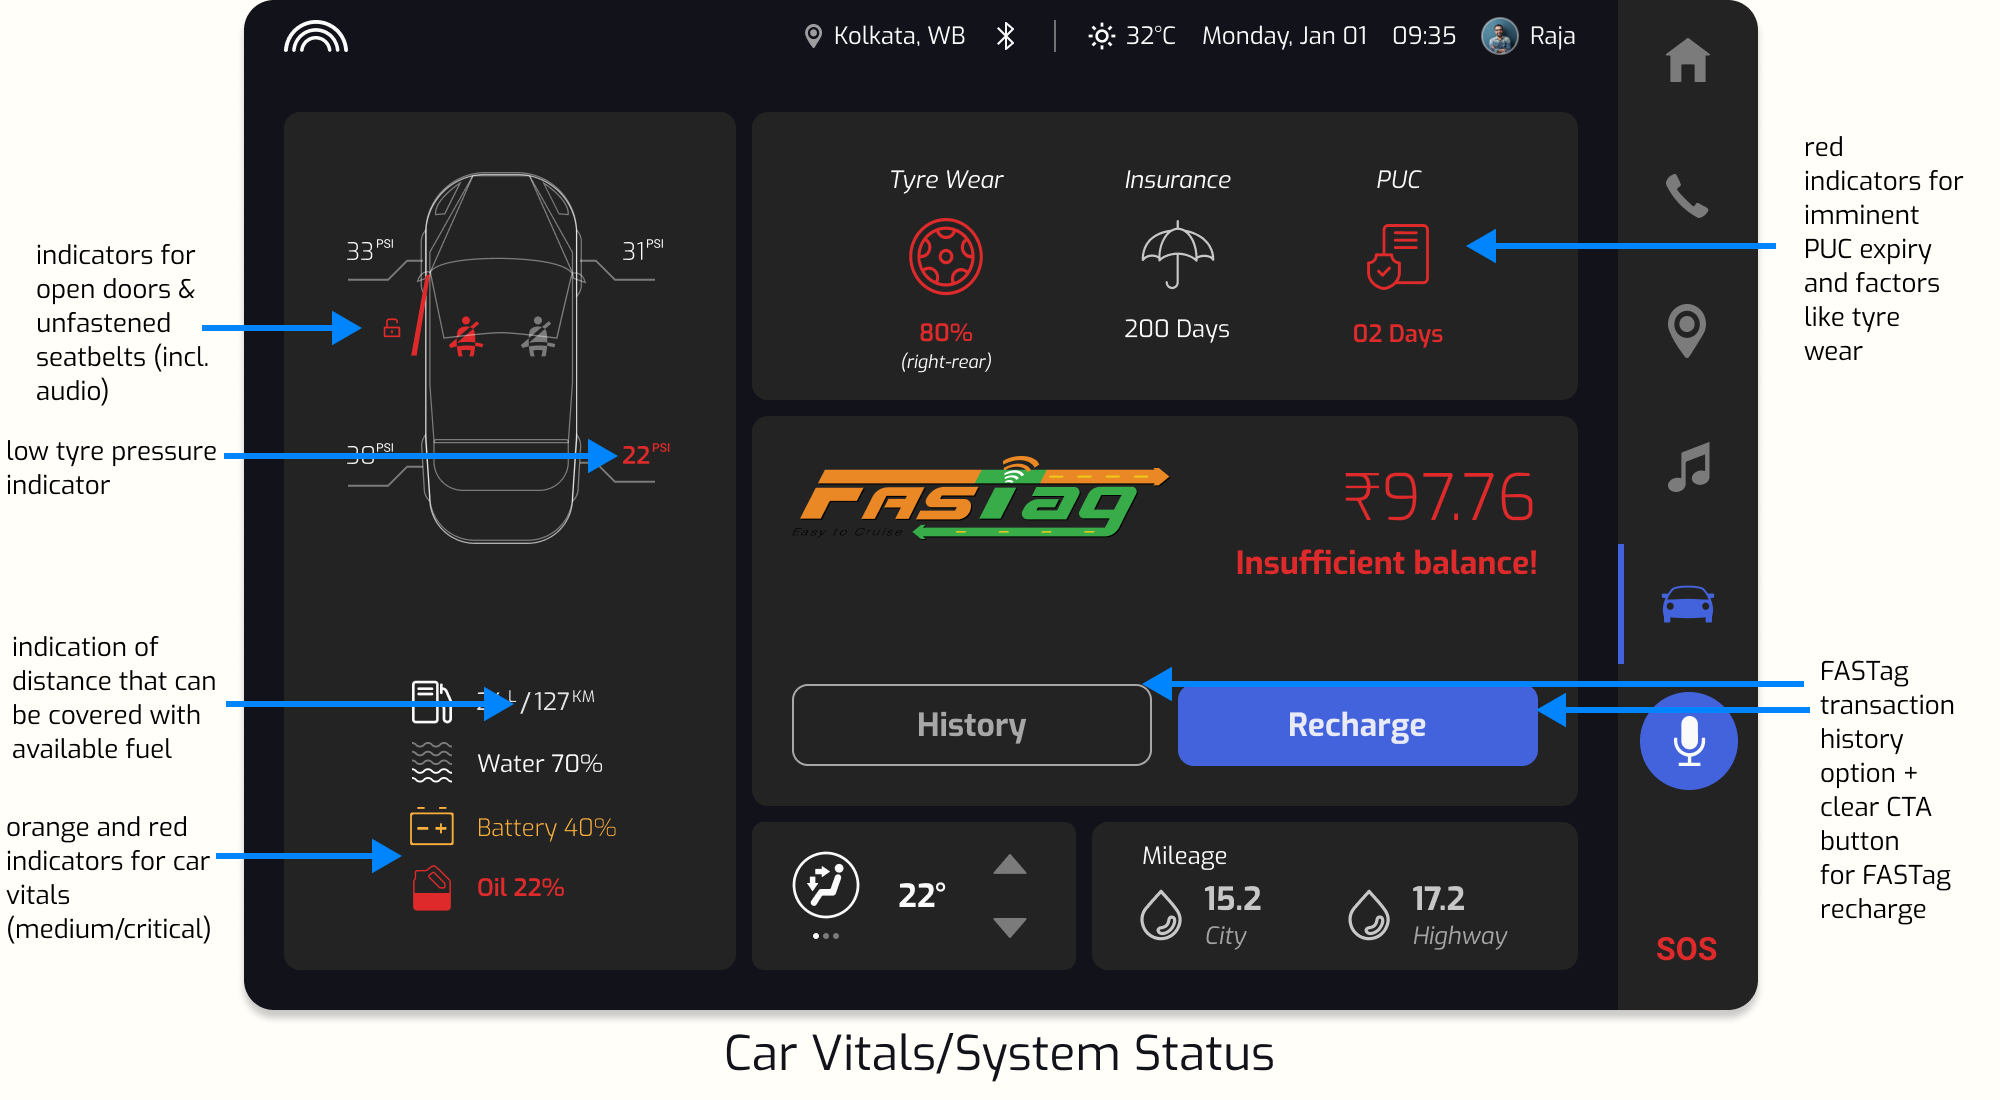 Saathi final system status/car vitals screen with annotations